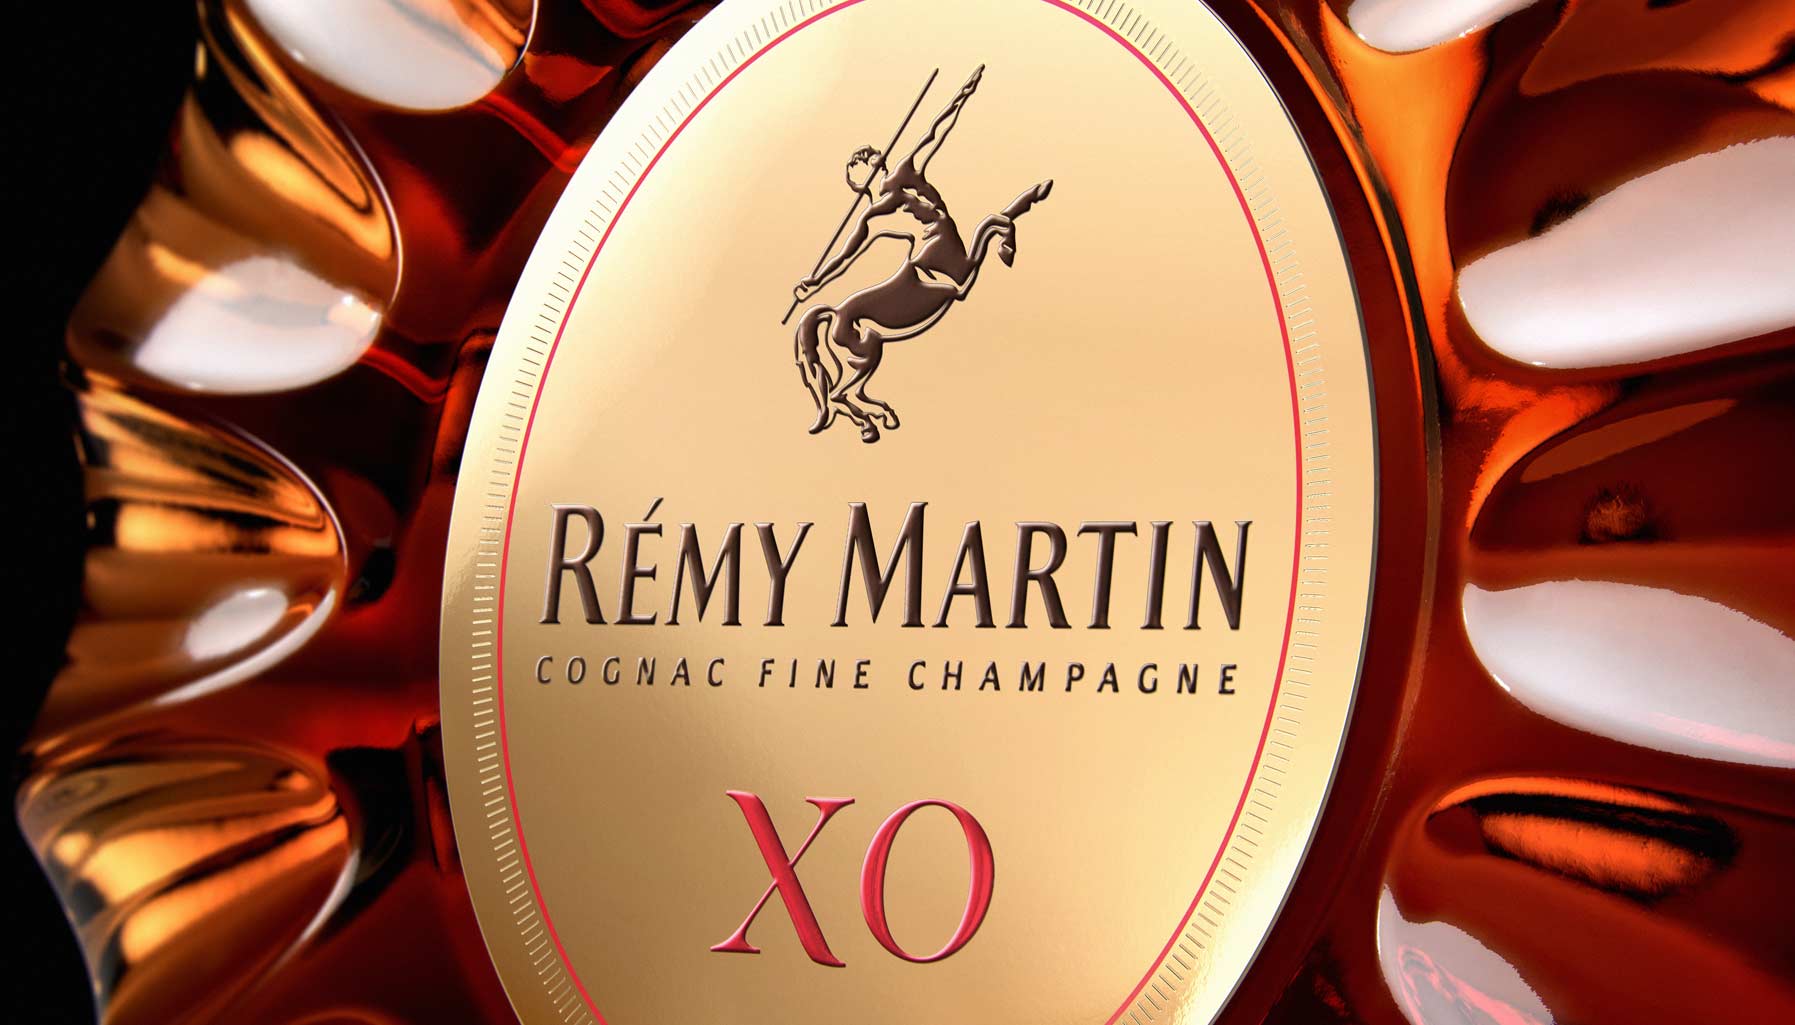 The evolution of Remy Martin, according to Baptiste Loiseau